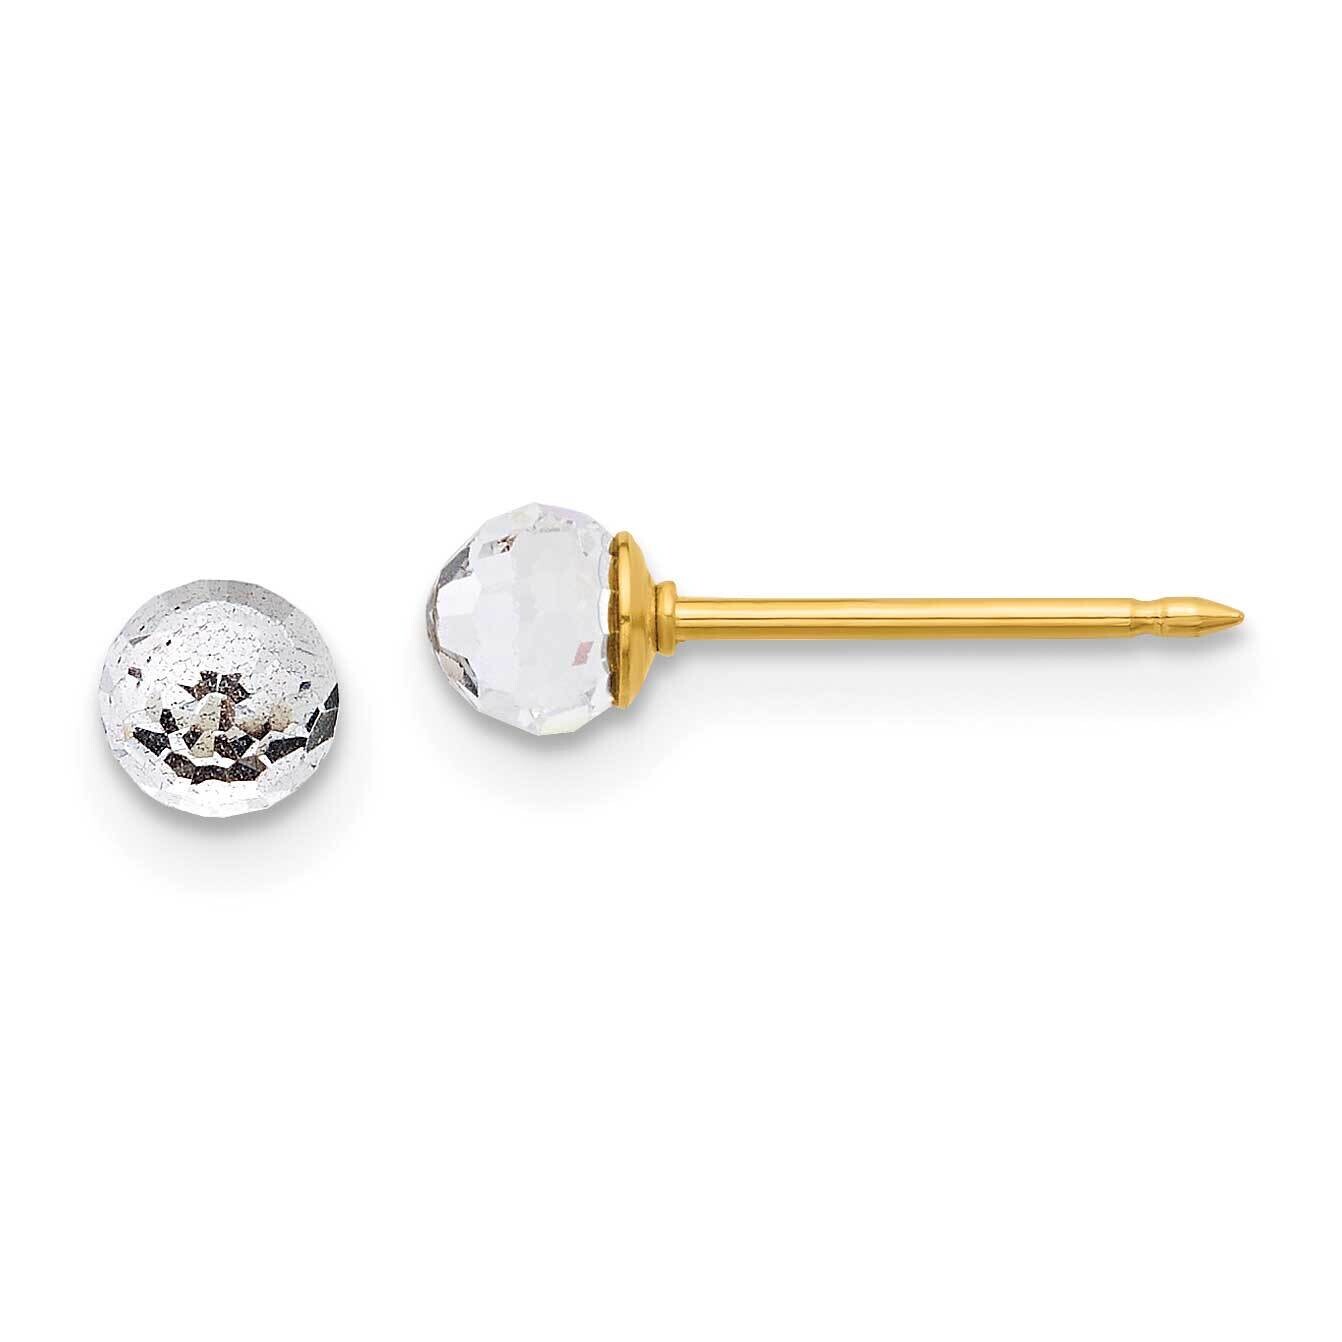 Inverness 4mm Crystal Faceted Ball Post Earrings 14k Polished Gold 302E